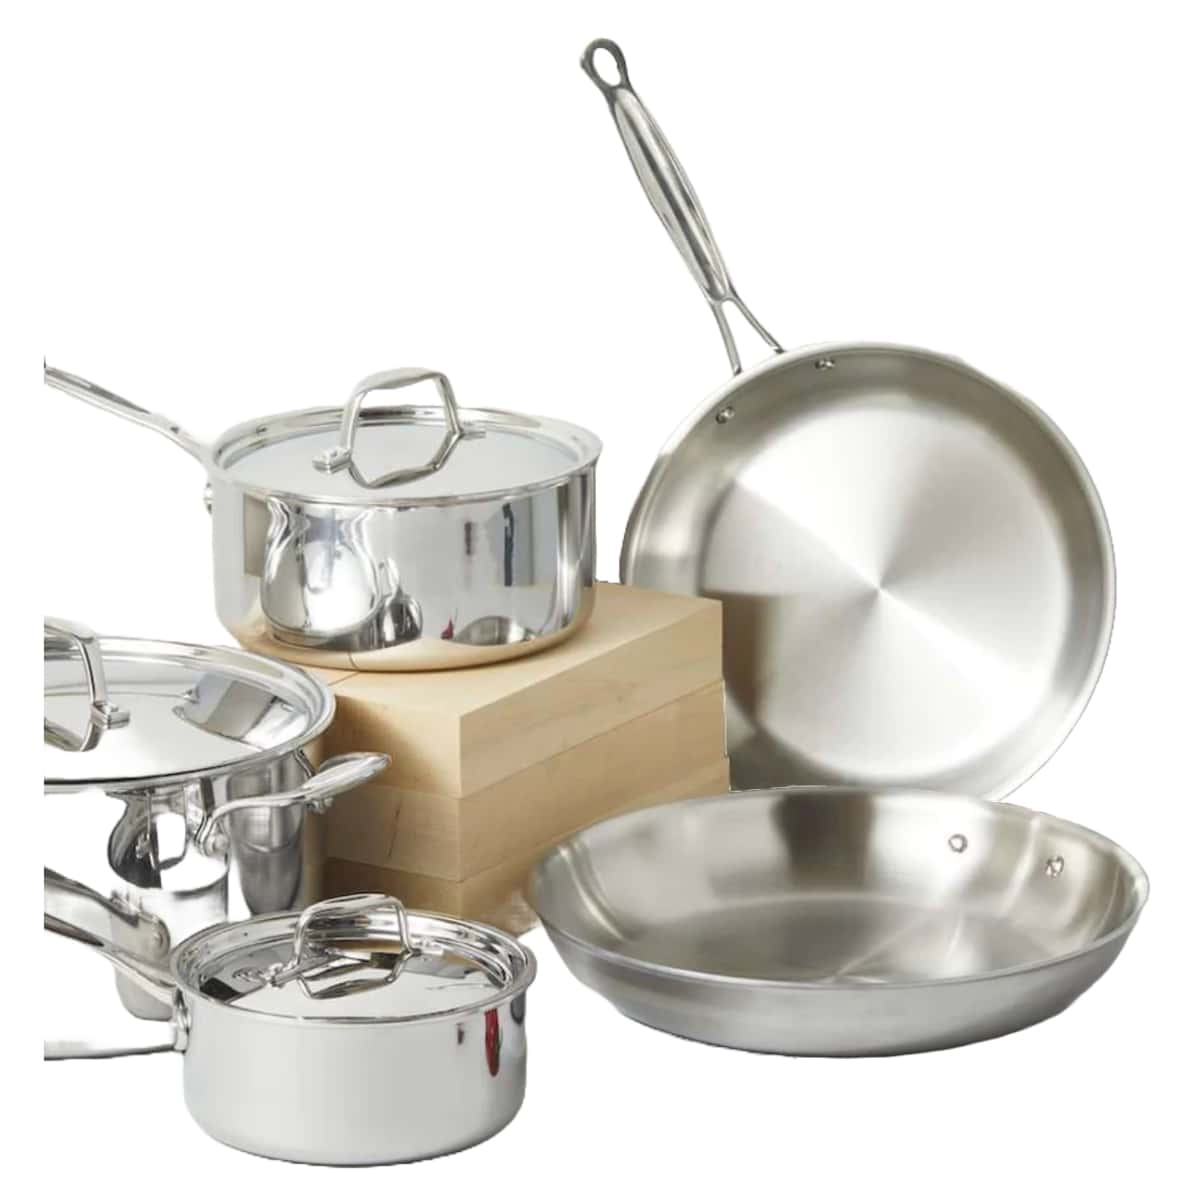 7 piece stainless steel cookware set